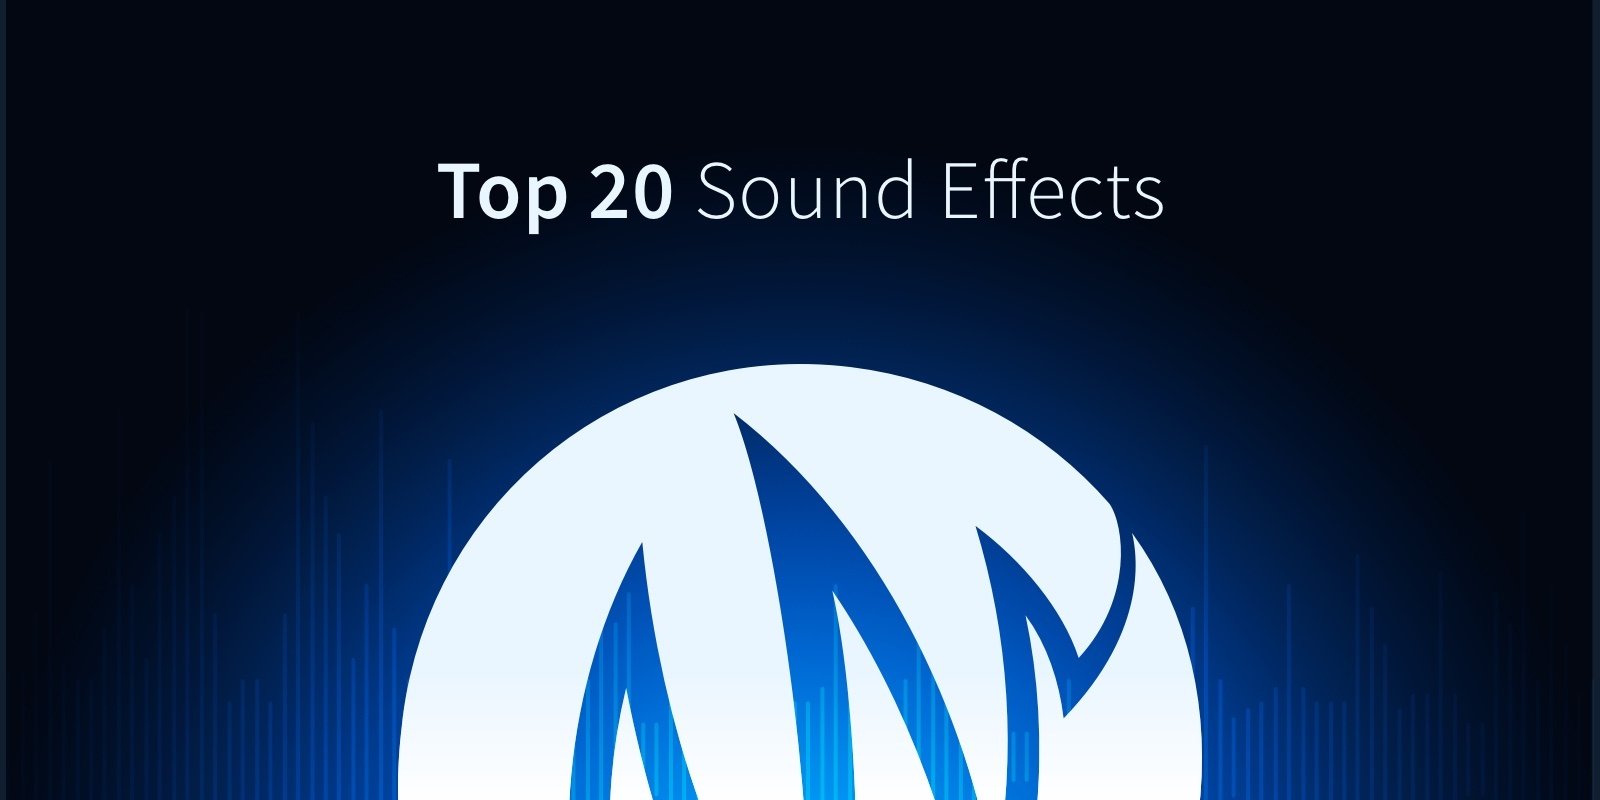 Top 5 Copyright Free Sound Effects from  Studio Audio Library 